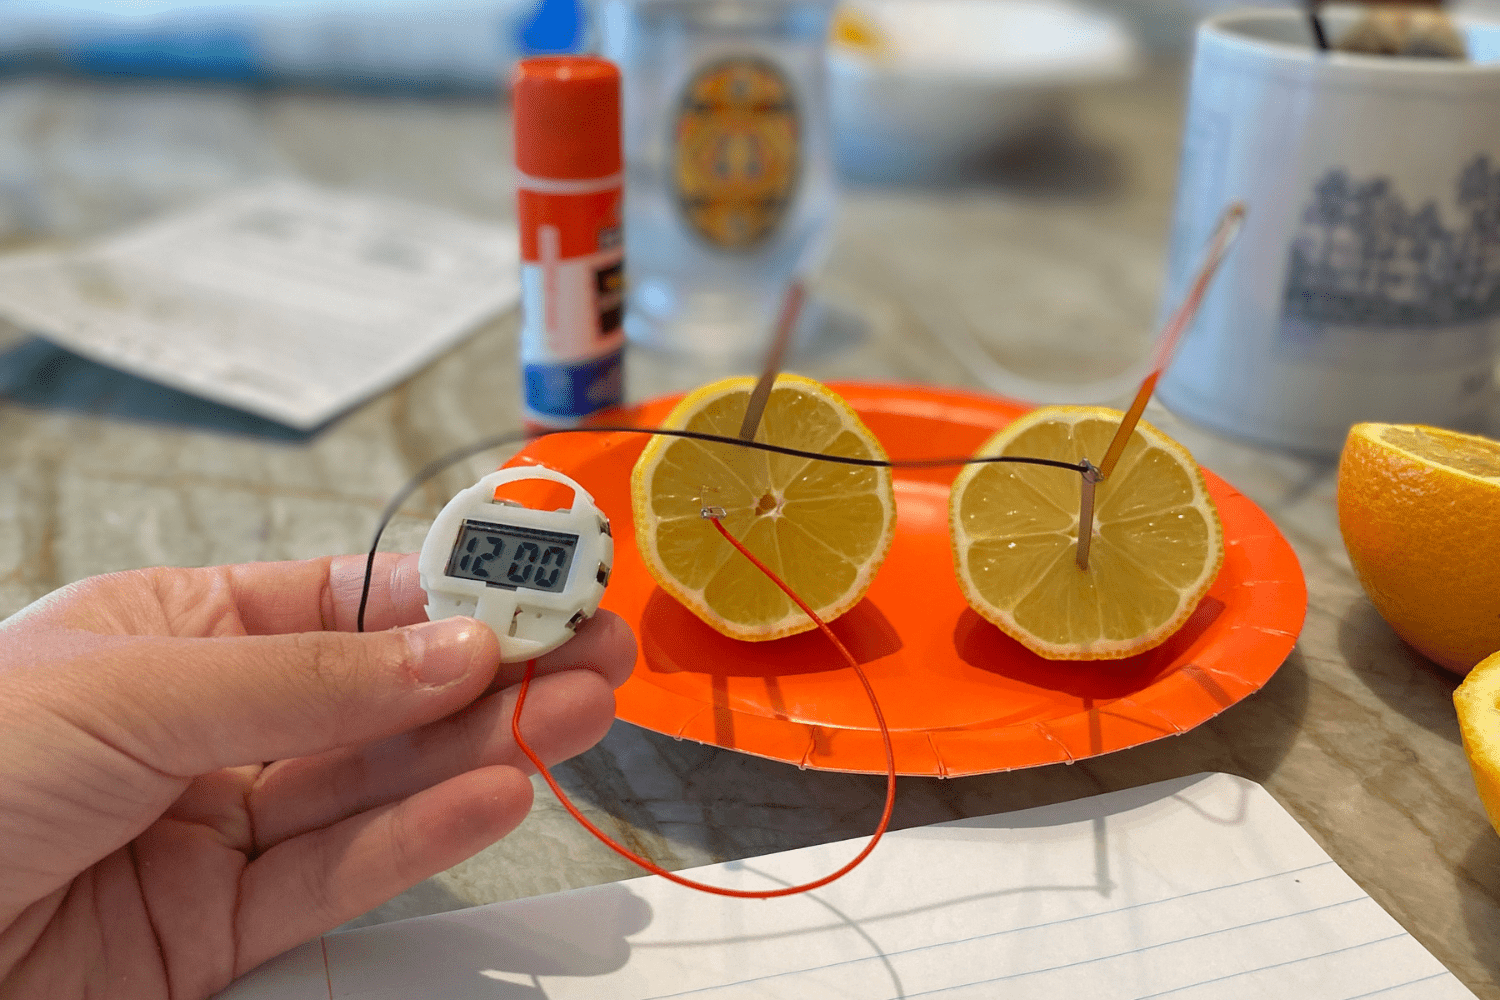 Sliced lemon contains two copper and zinc electrodes with white, black and red wires that connect to a small LED clock